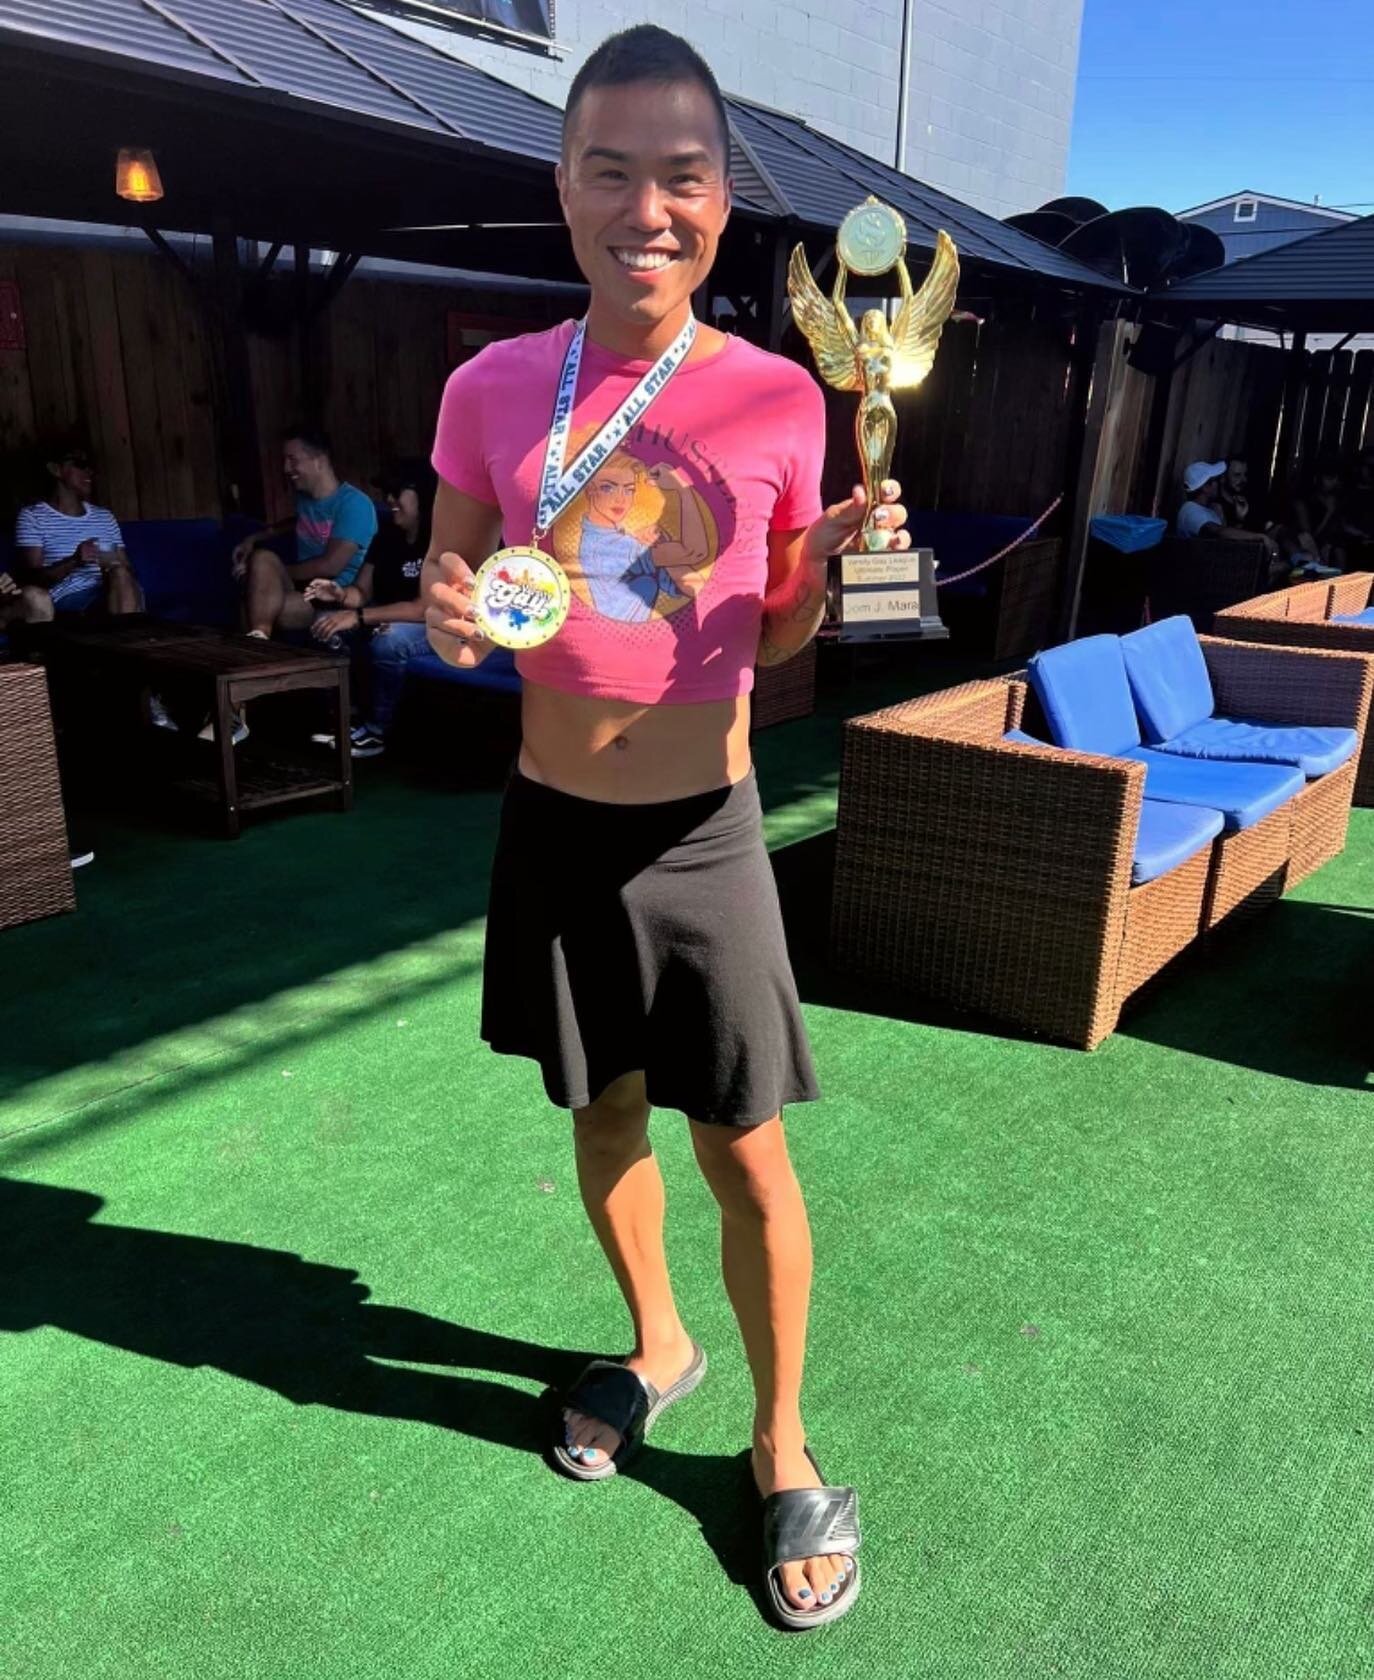 Congratulations 🍾🎉🎊🎈 to @dommy_domdom14 for being the first winner of the &ldquo;ultimate player&rdquo; of summer 2022!!! 
.
.
.
.
. 
#varsitygayleague #varsitygayleaguesandiego #vglsd #gaysports #gaykickball #lgbtq #gaypride #gay #🏳️&zwj;🌈 #ga